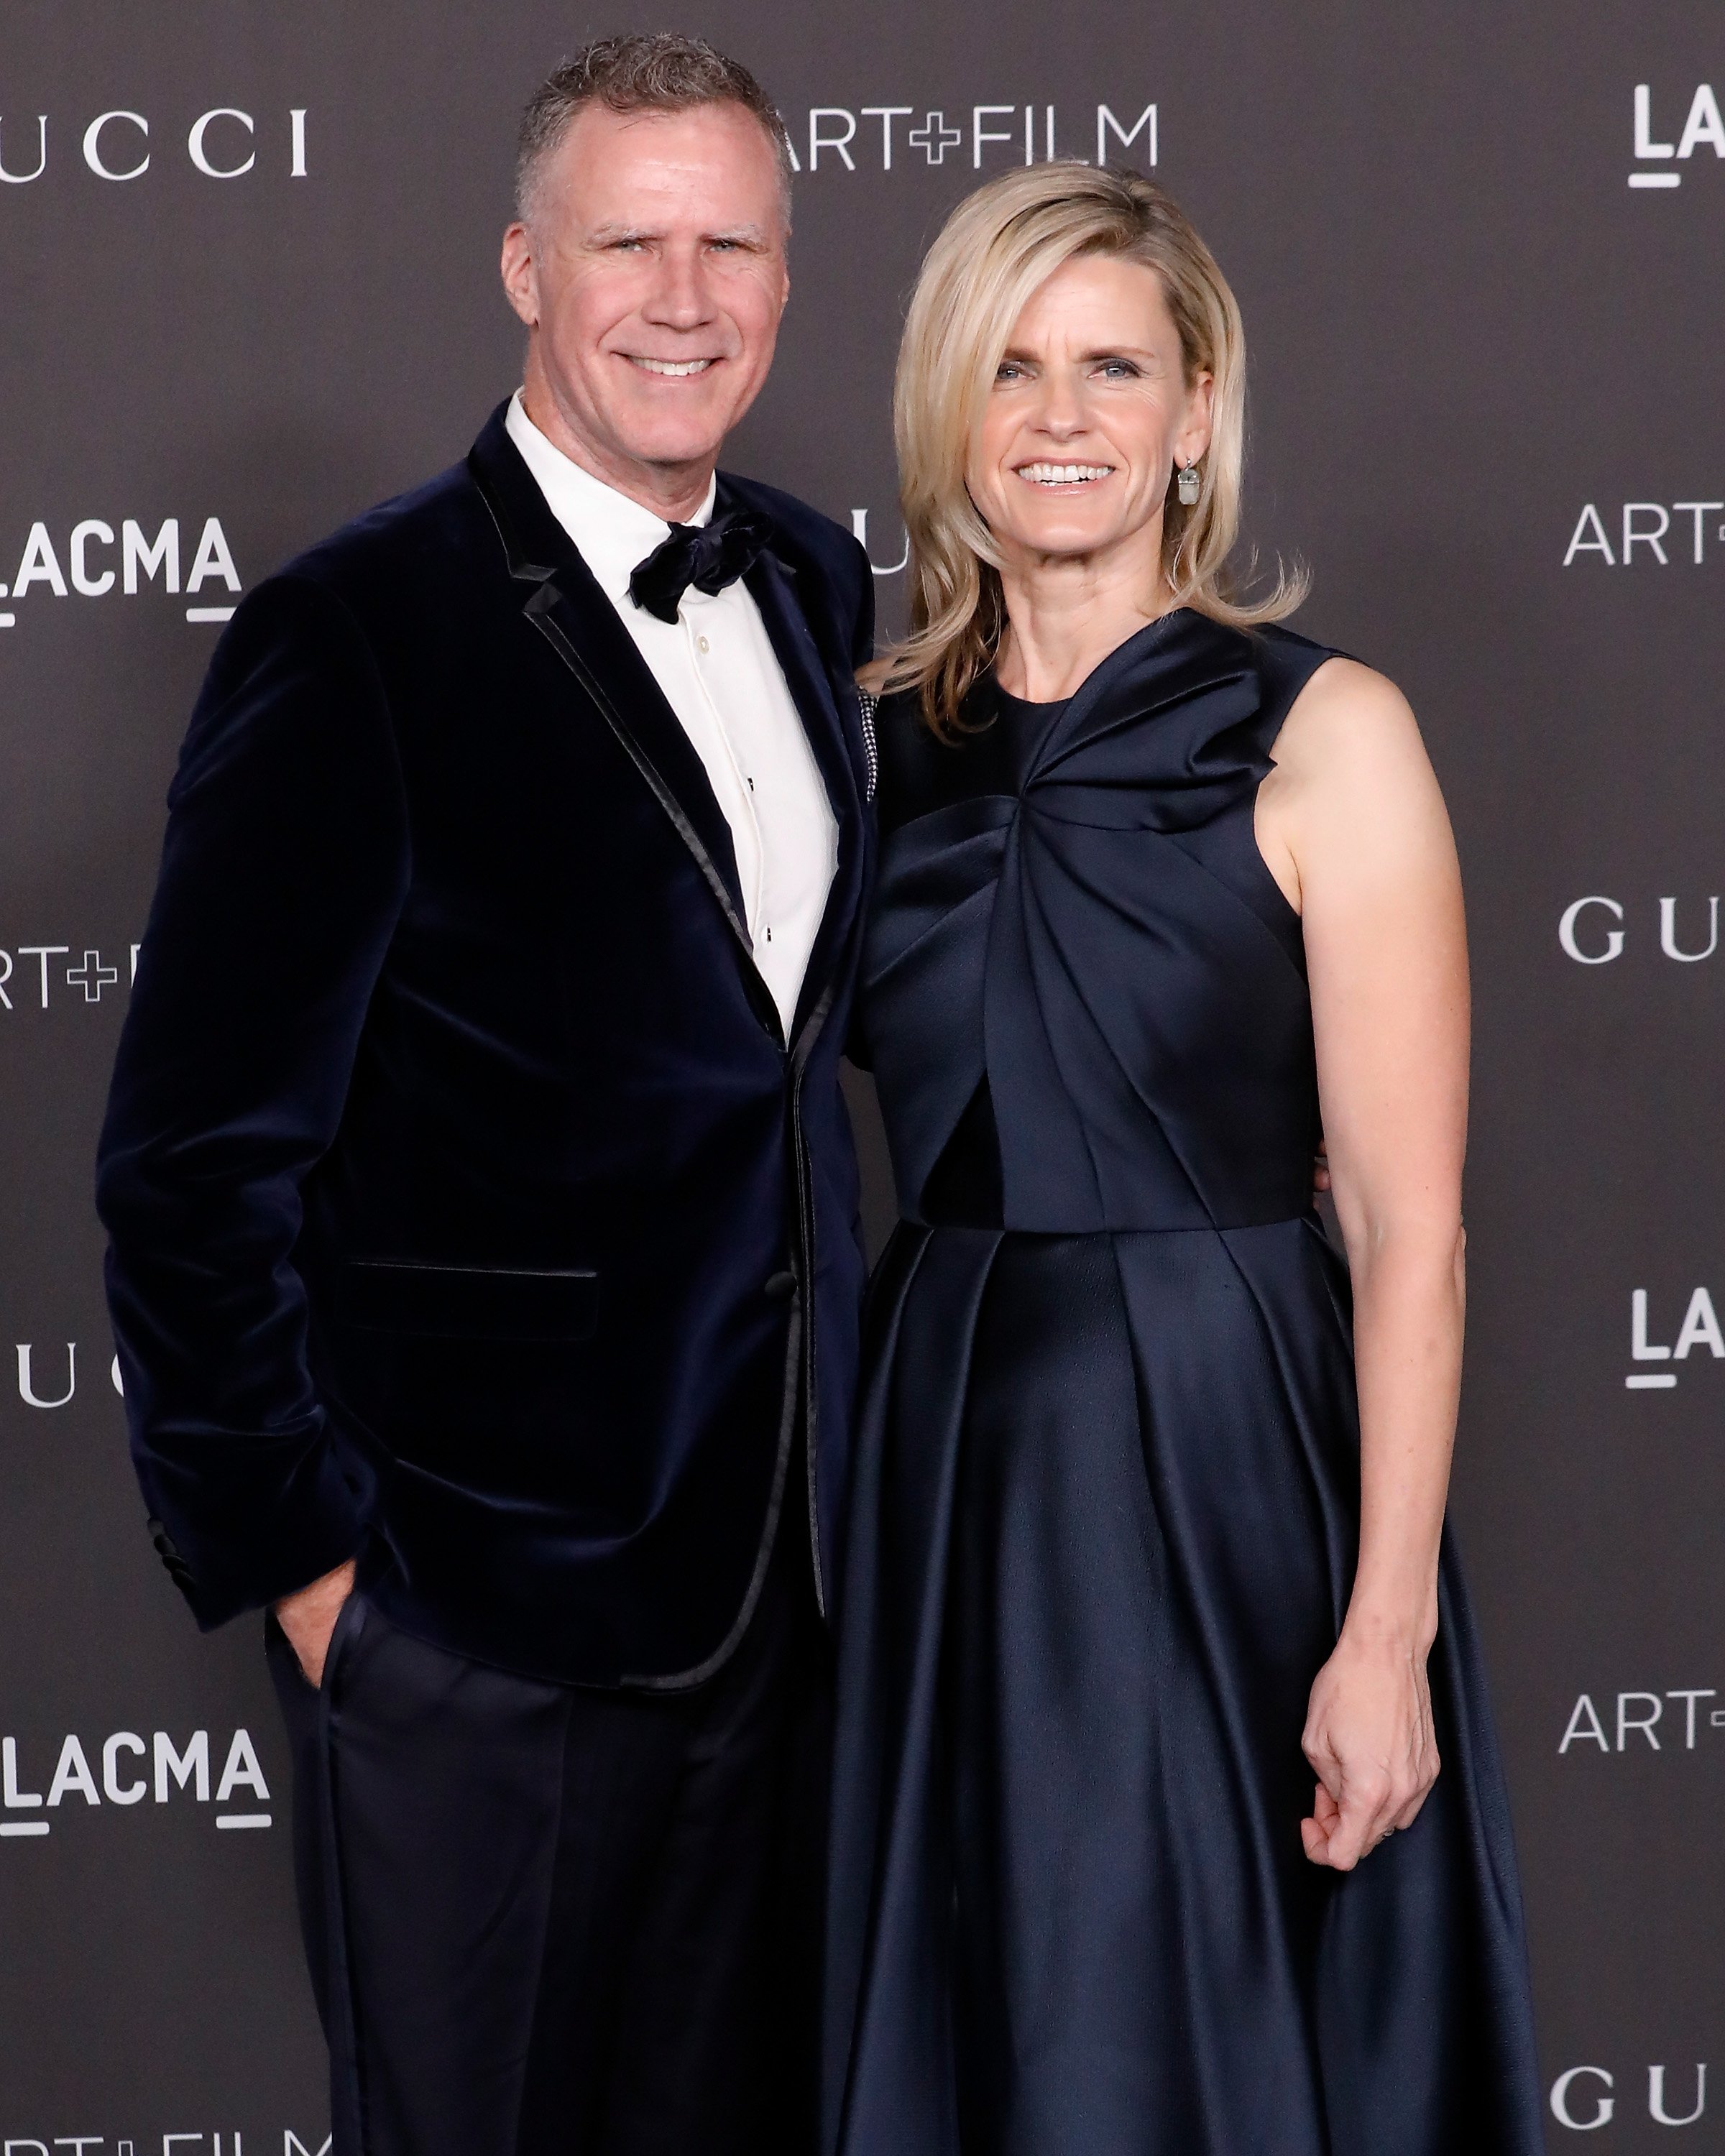 Will Ferrell and Viveca Paulin during the 2019 LACMA Art + Film Gala at LACMA on November 2, 2019, in Los Angeles, California. | Source: Getty Images